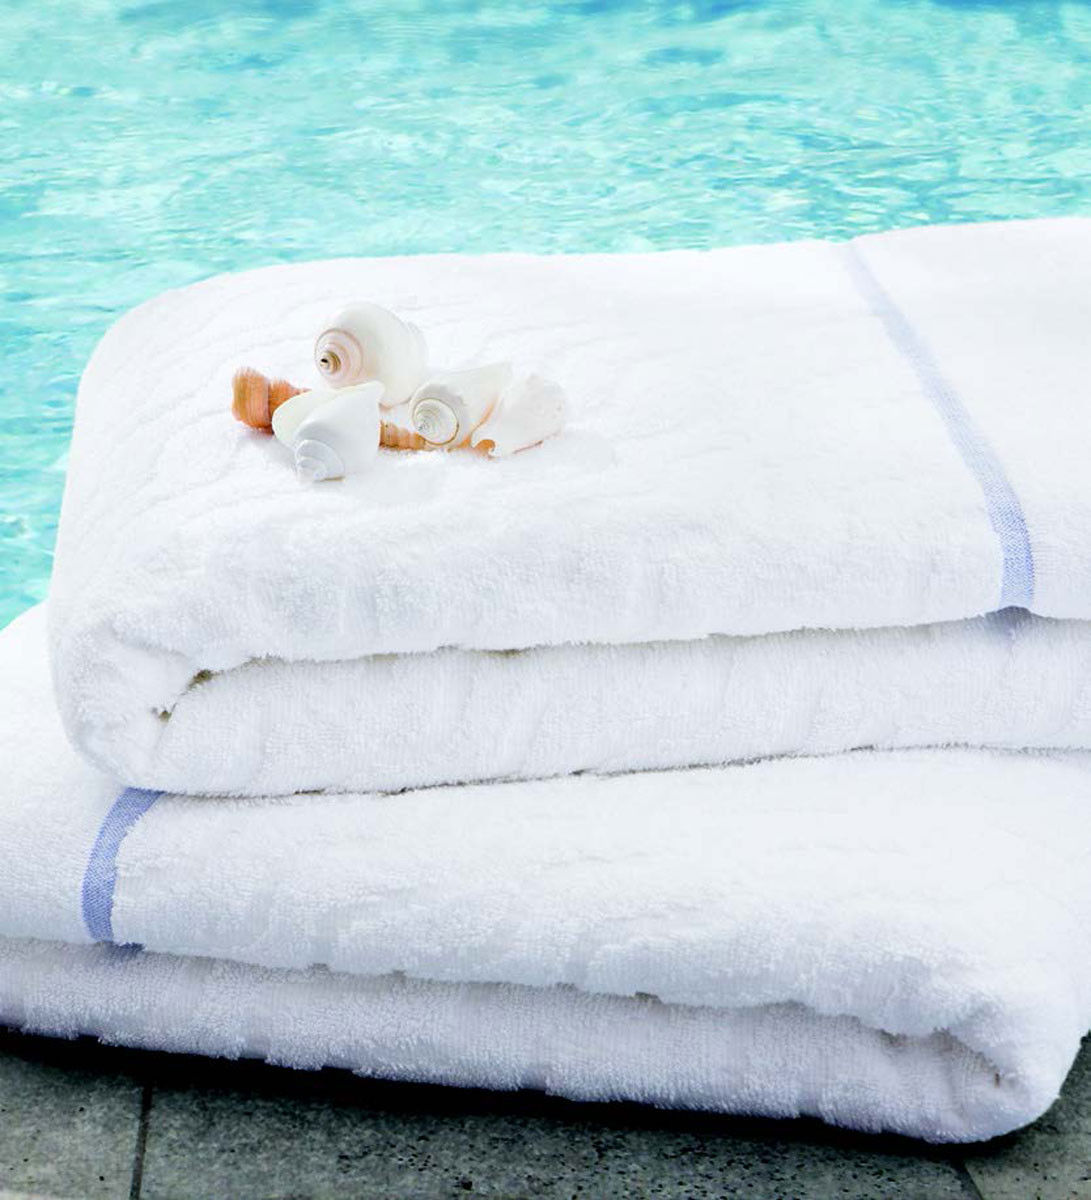 What features do EuroSpa towels offer for use around the pool?